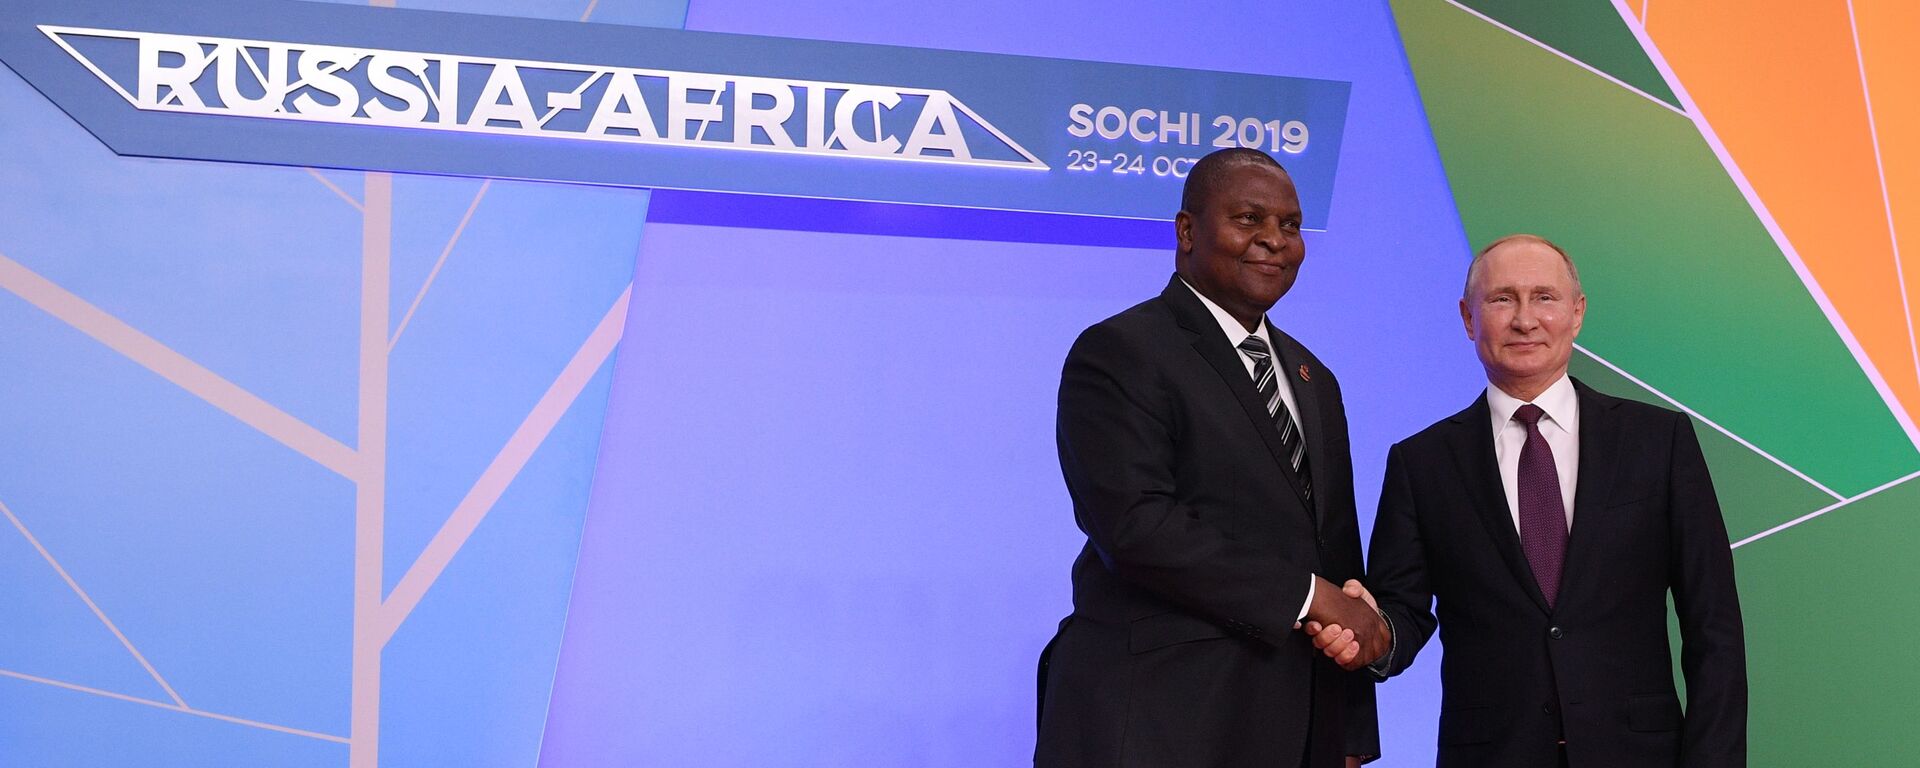 Russian President Vladimir Putin shakes hands with Central African President Faustin-Archange Touadéra in the sidelines of first Russia-Africa Summit was held on 23–24 October 2019 in Sochi, Russia. - Sputnik Africa, 1920, 18.04.2023